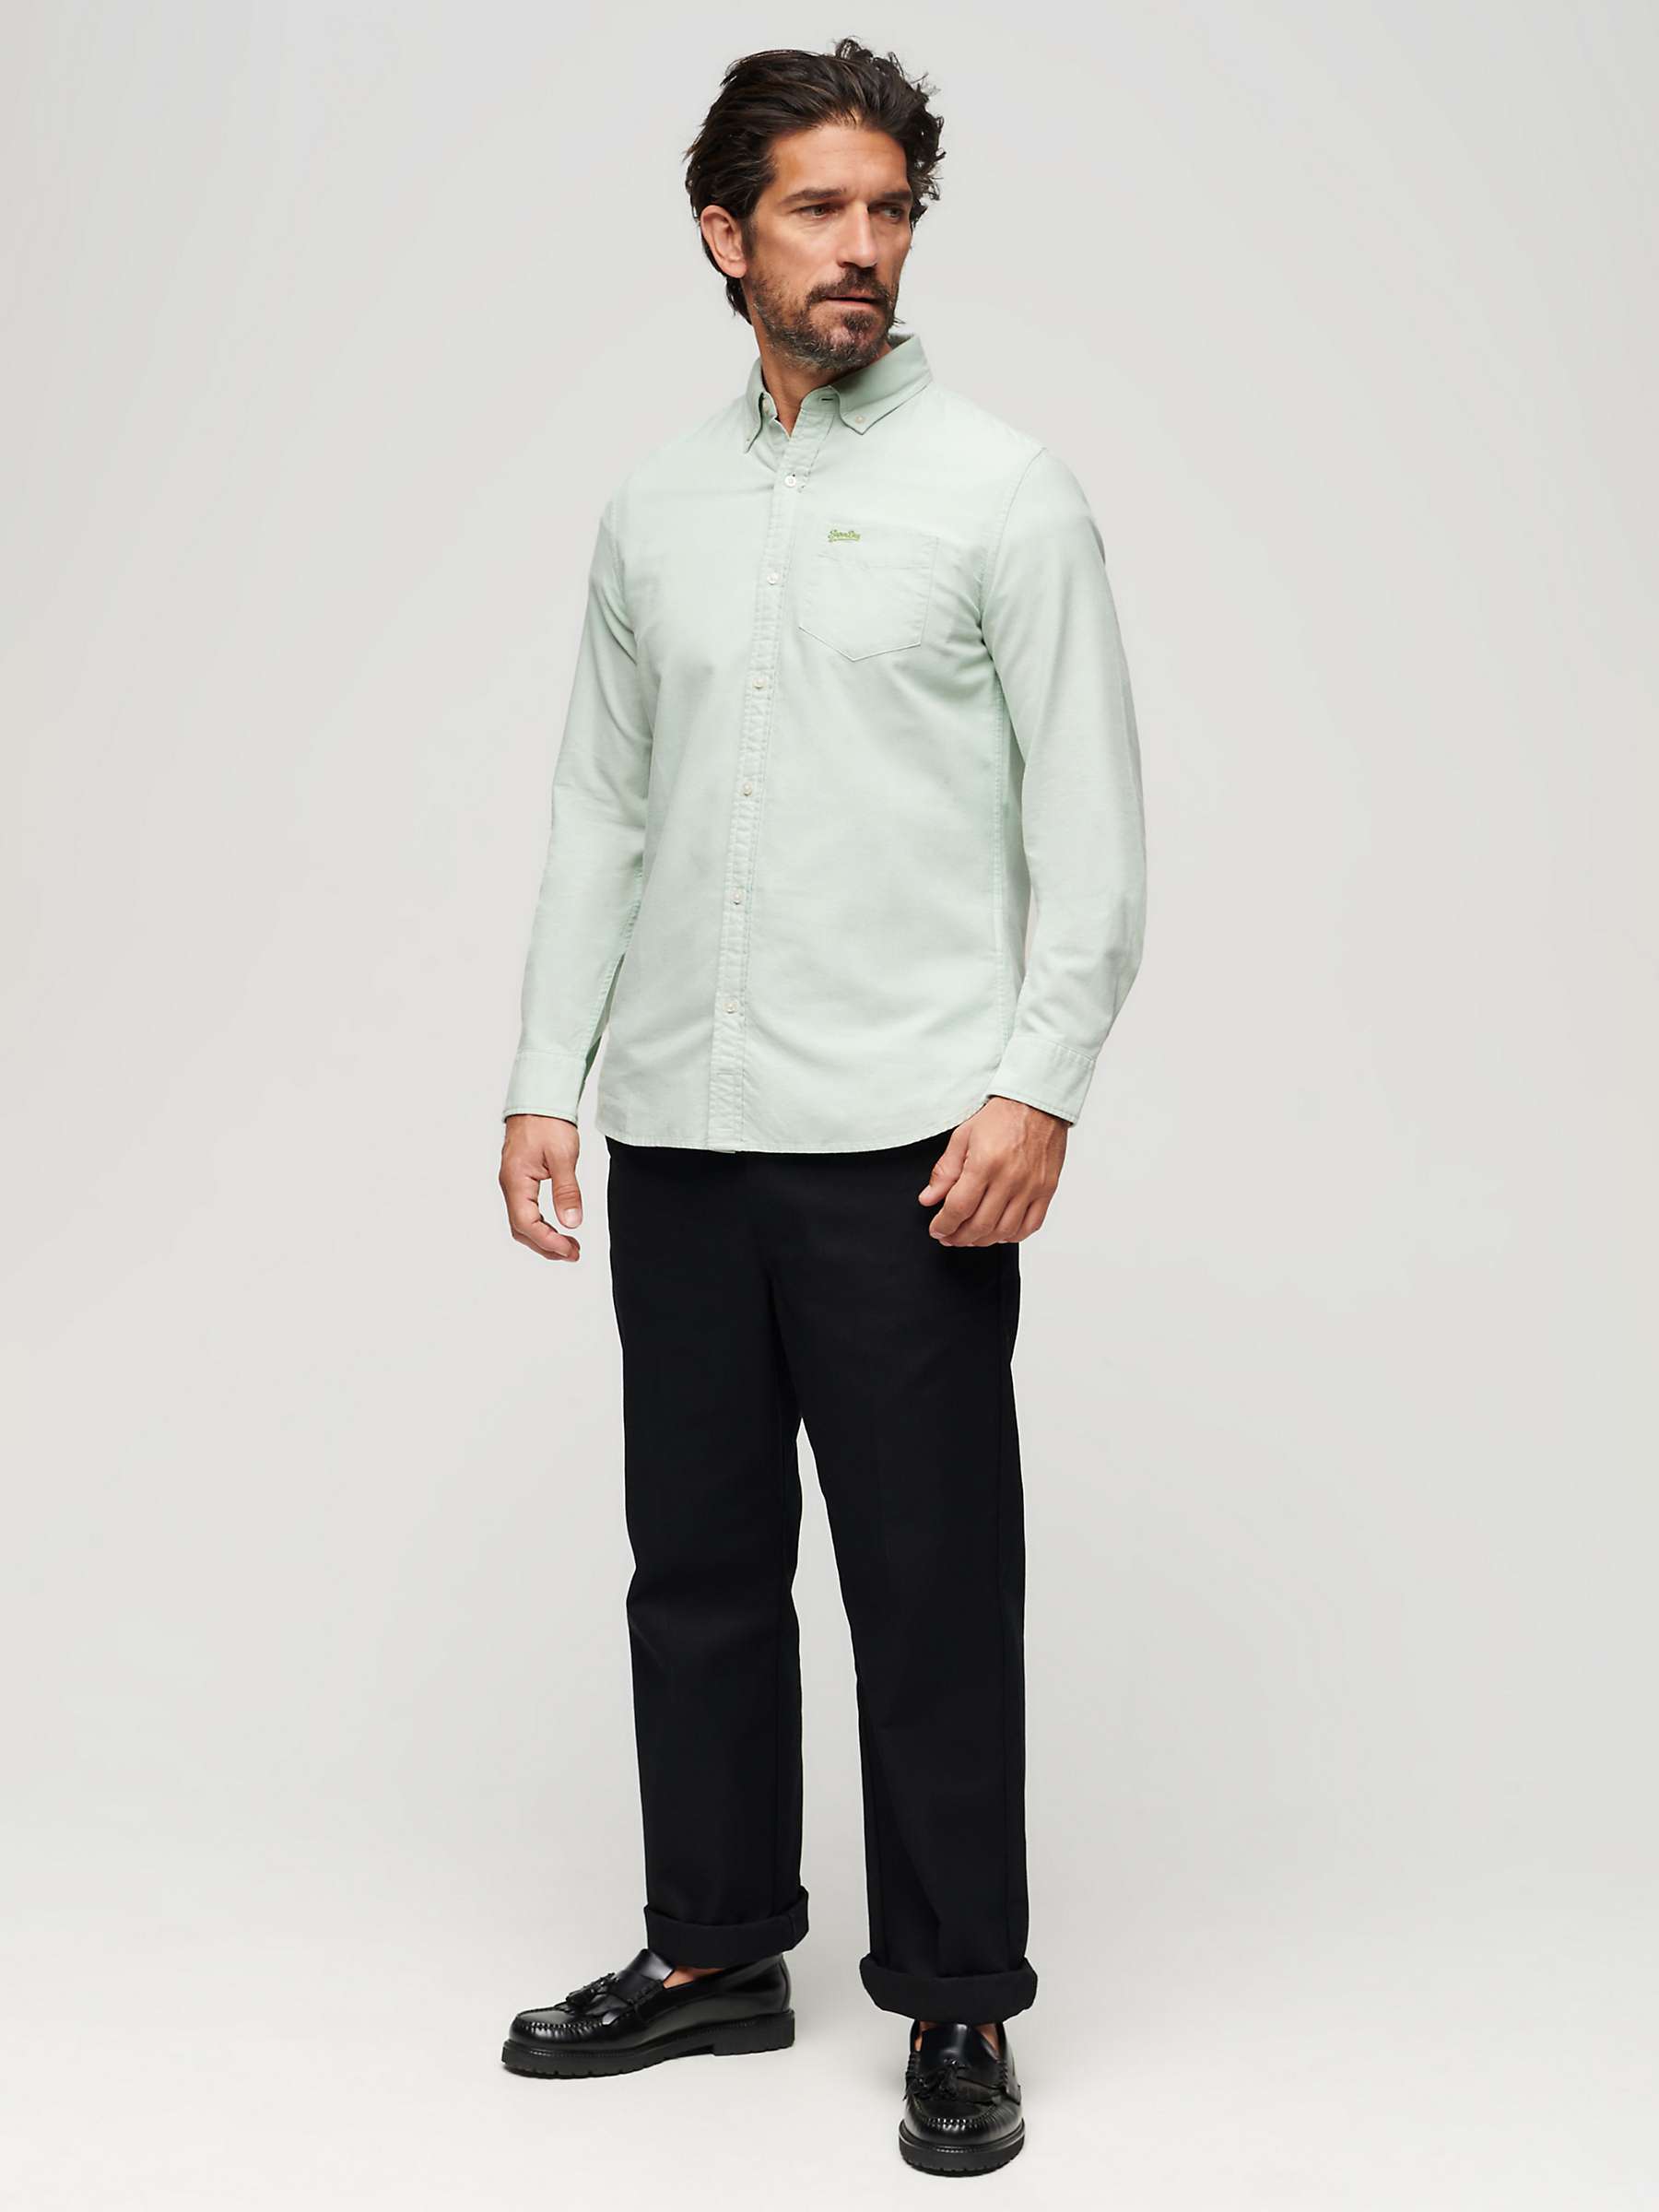 Buy Superdry Organic Cotton Long Sleeve Oxford Shirt Online at johnlewis.com